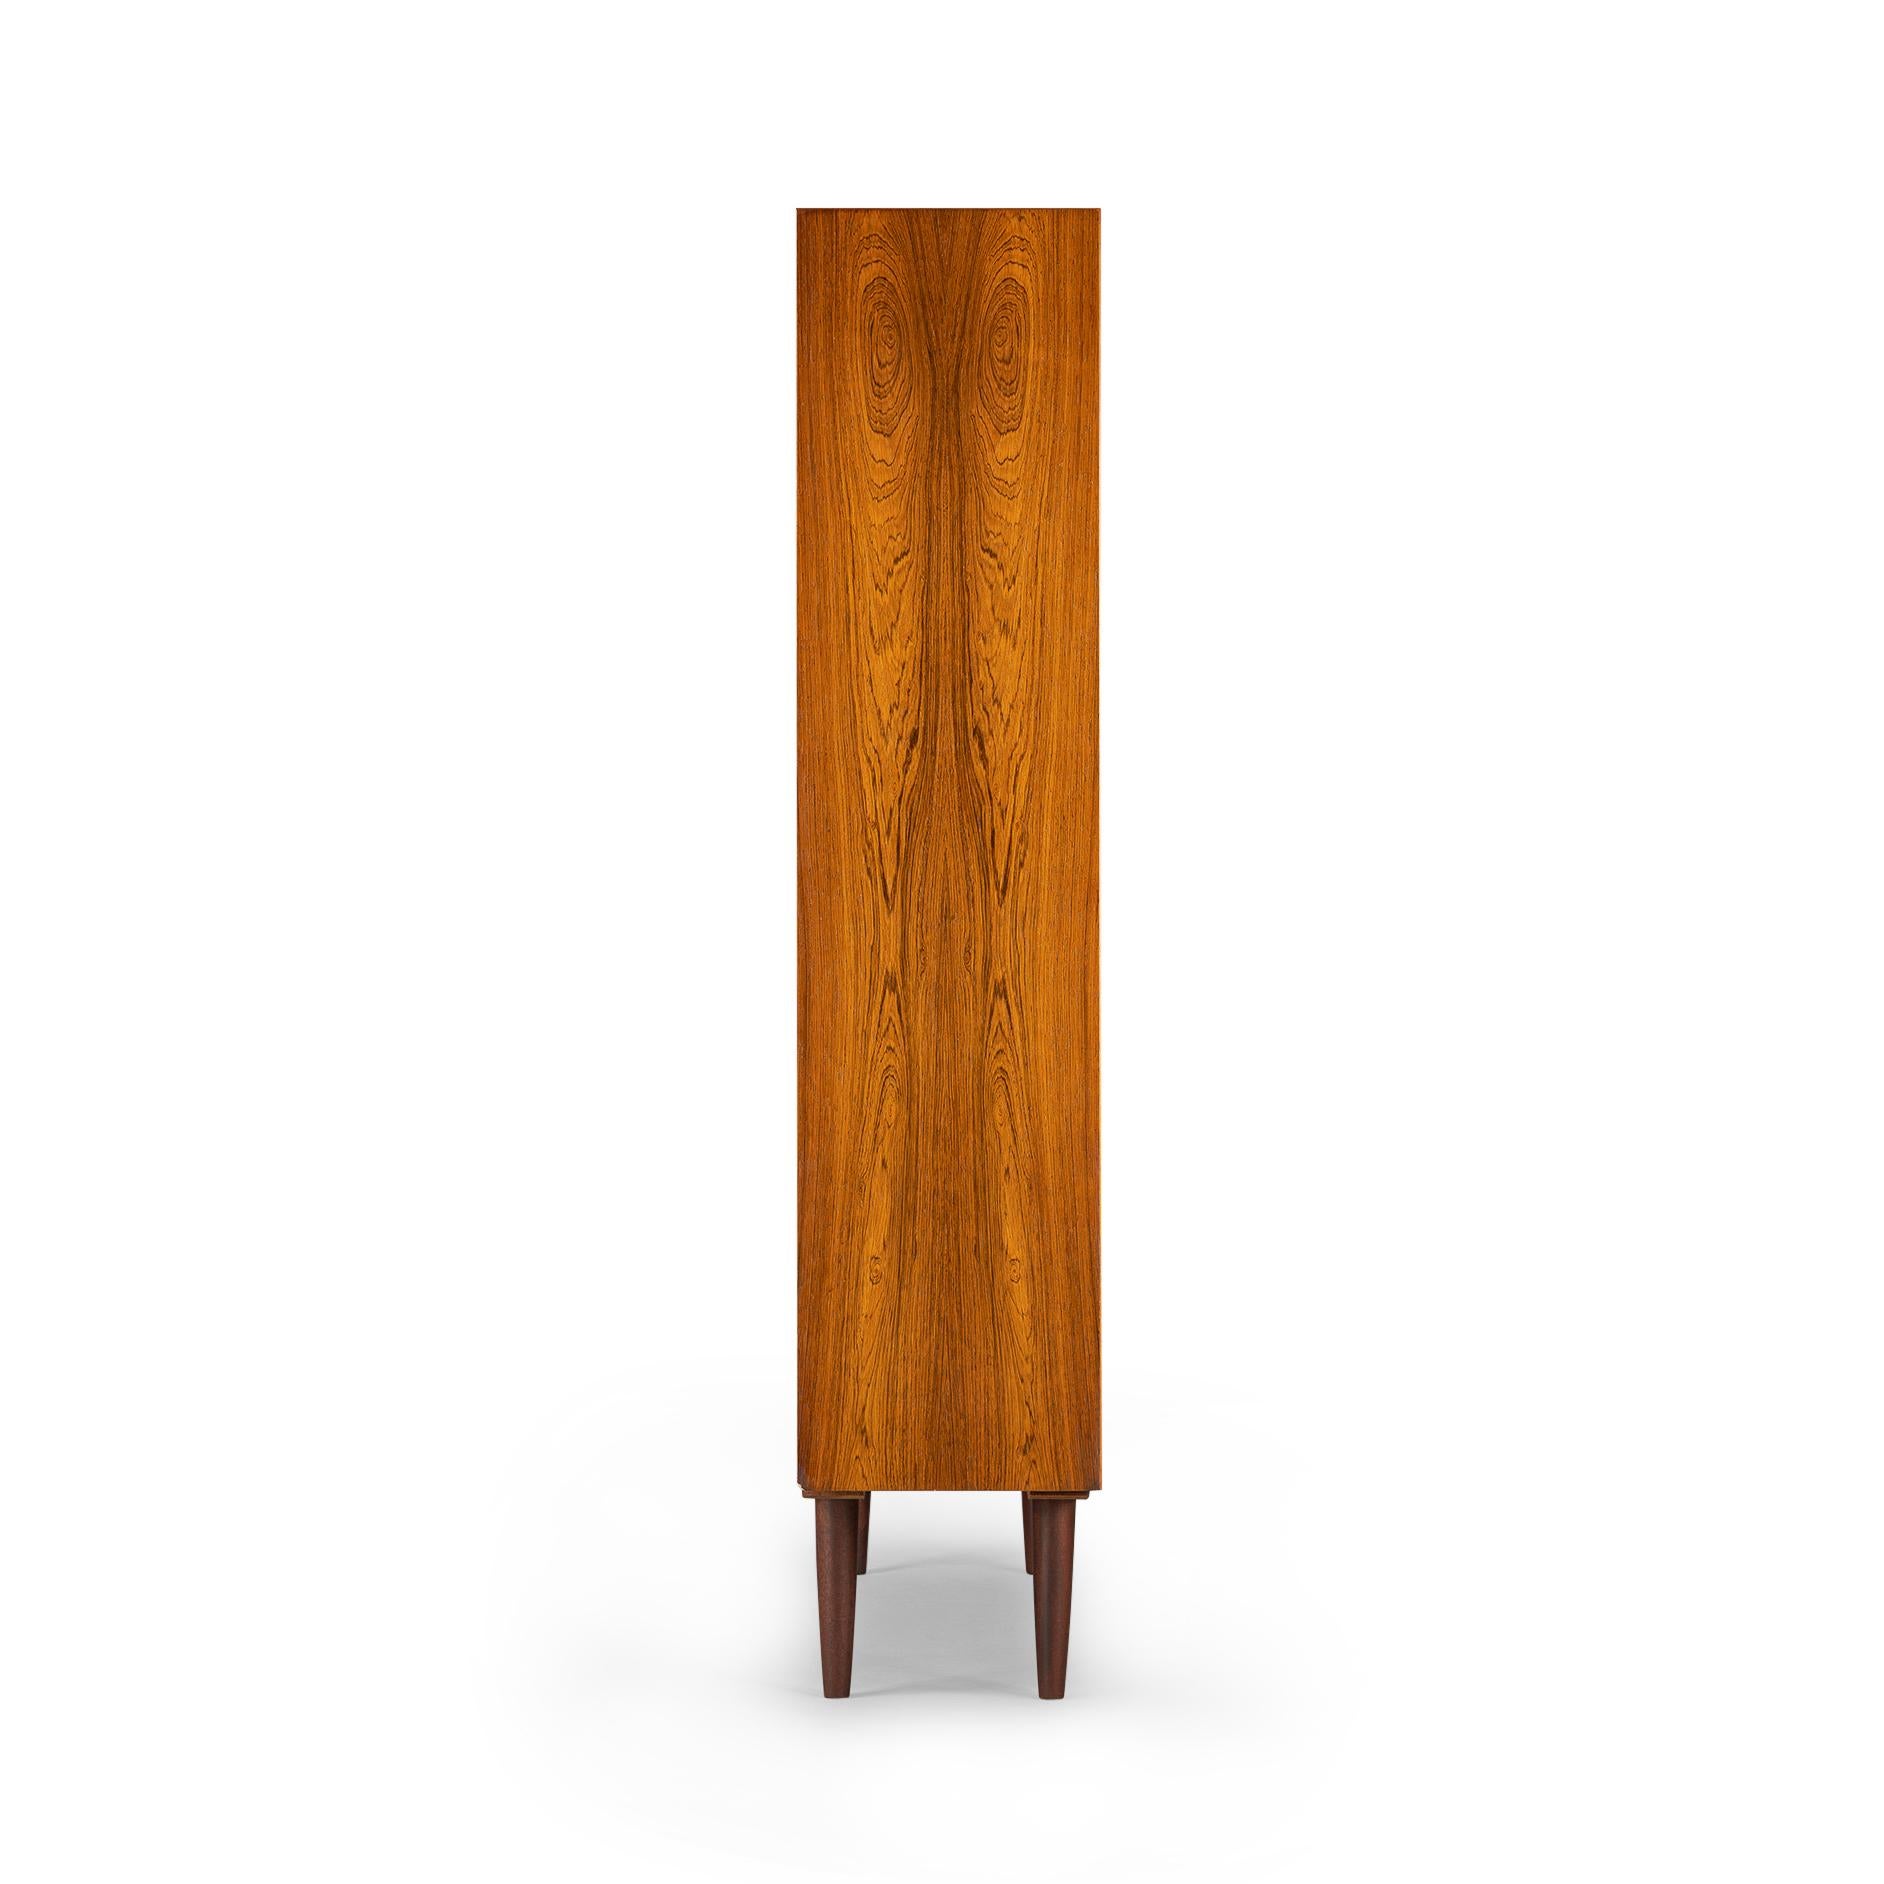 Danish tall bookcase in beautiful hardwood veneer. Designed by Carlo Jensen and made by Hundevad & Co. This bookcase is in very good vintage condition and has a total of 8 height-adjustable shelves.